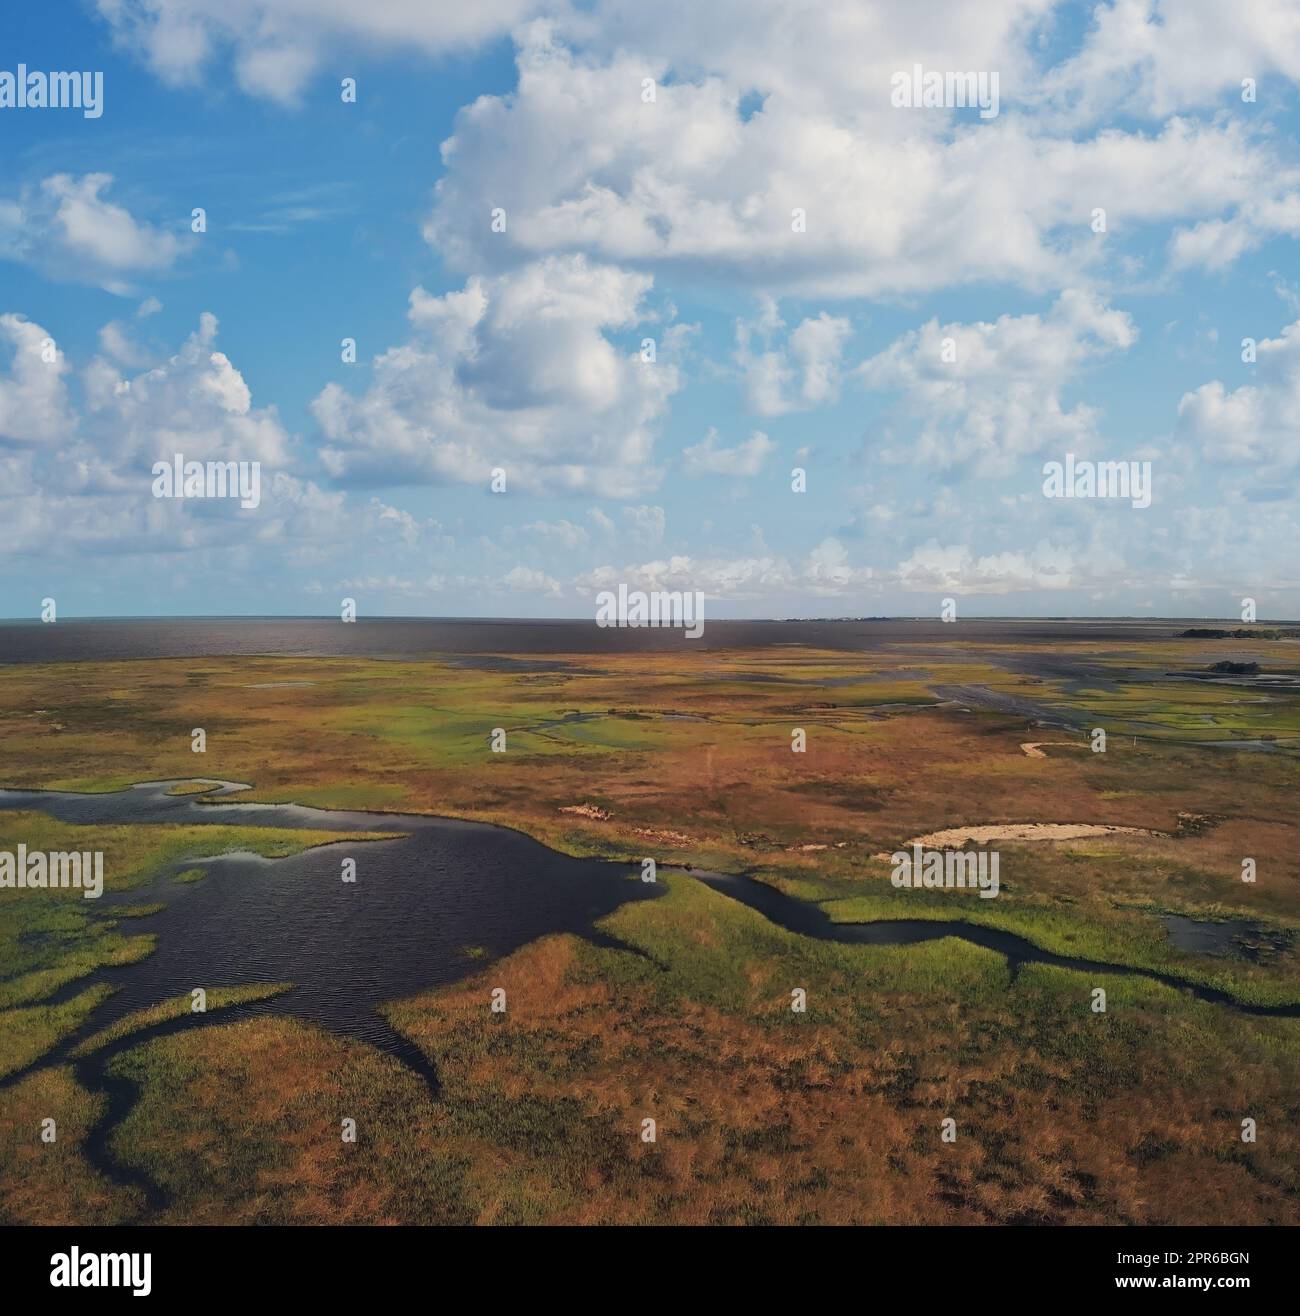 Aerial view of Swamp near Gulf of Mexico in Florida Stock Photo